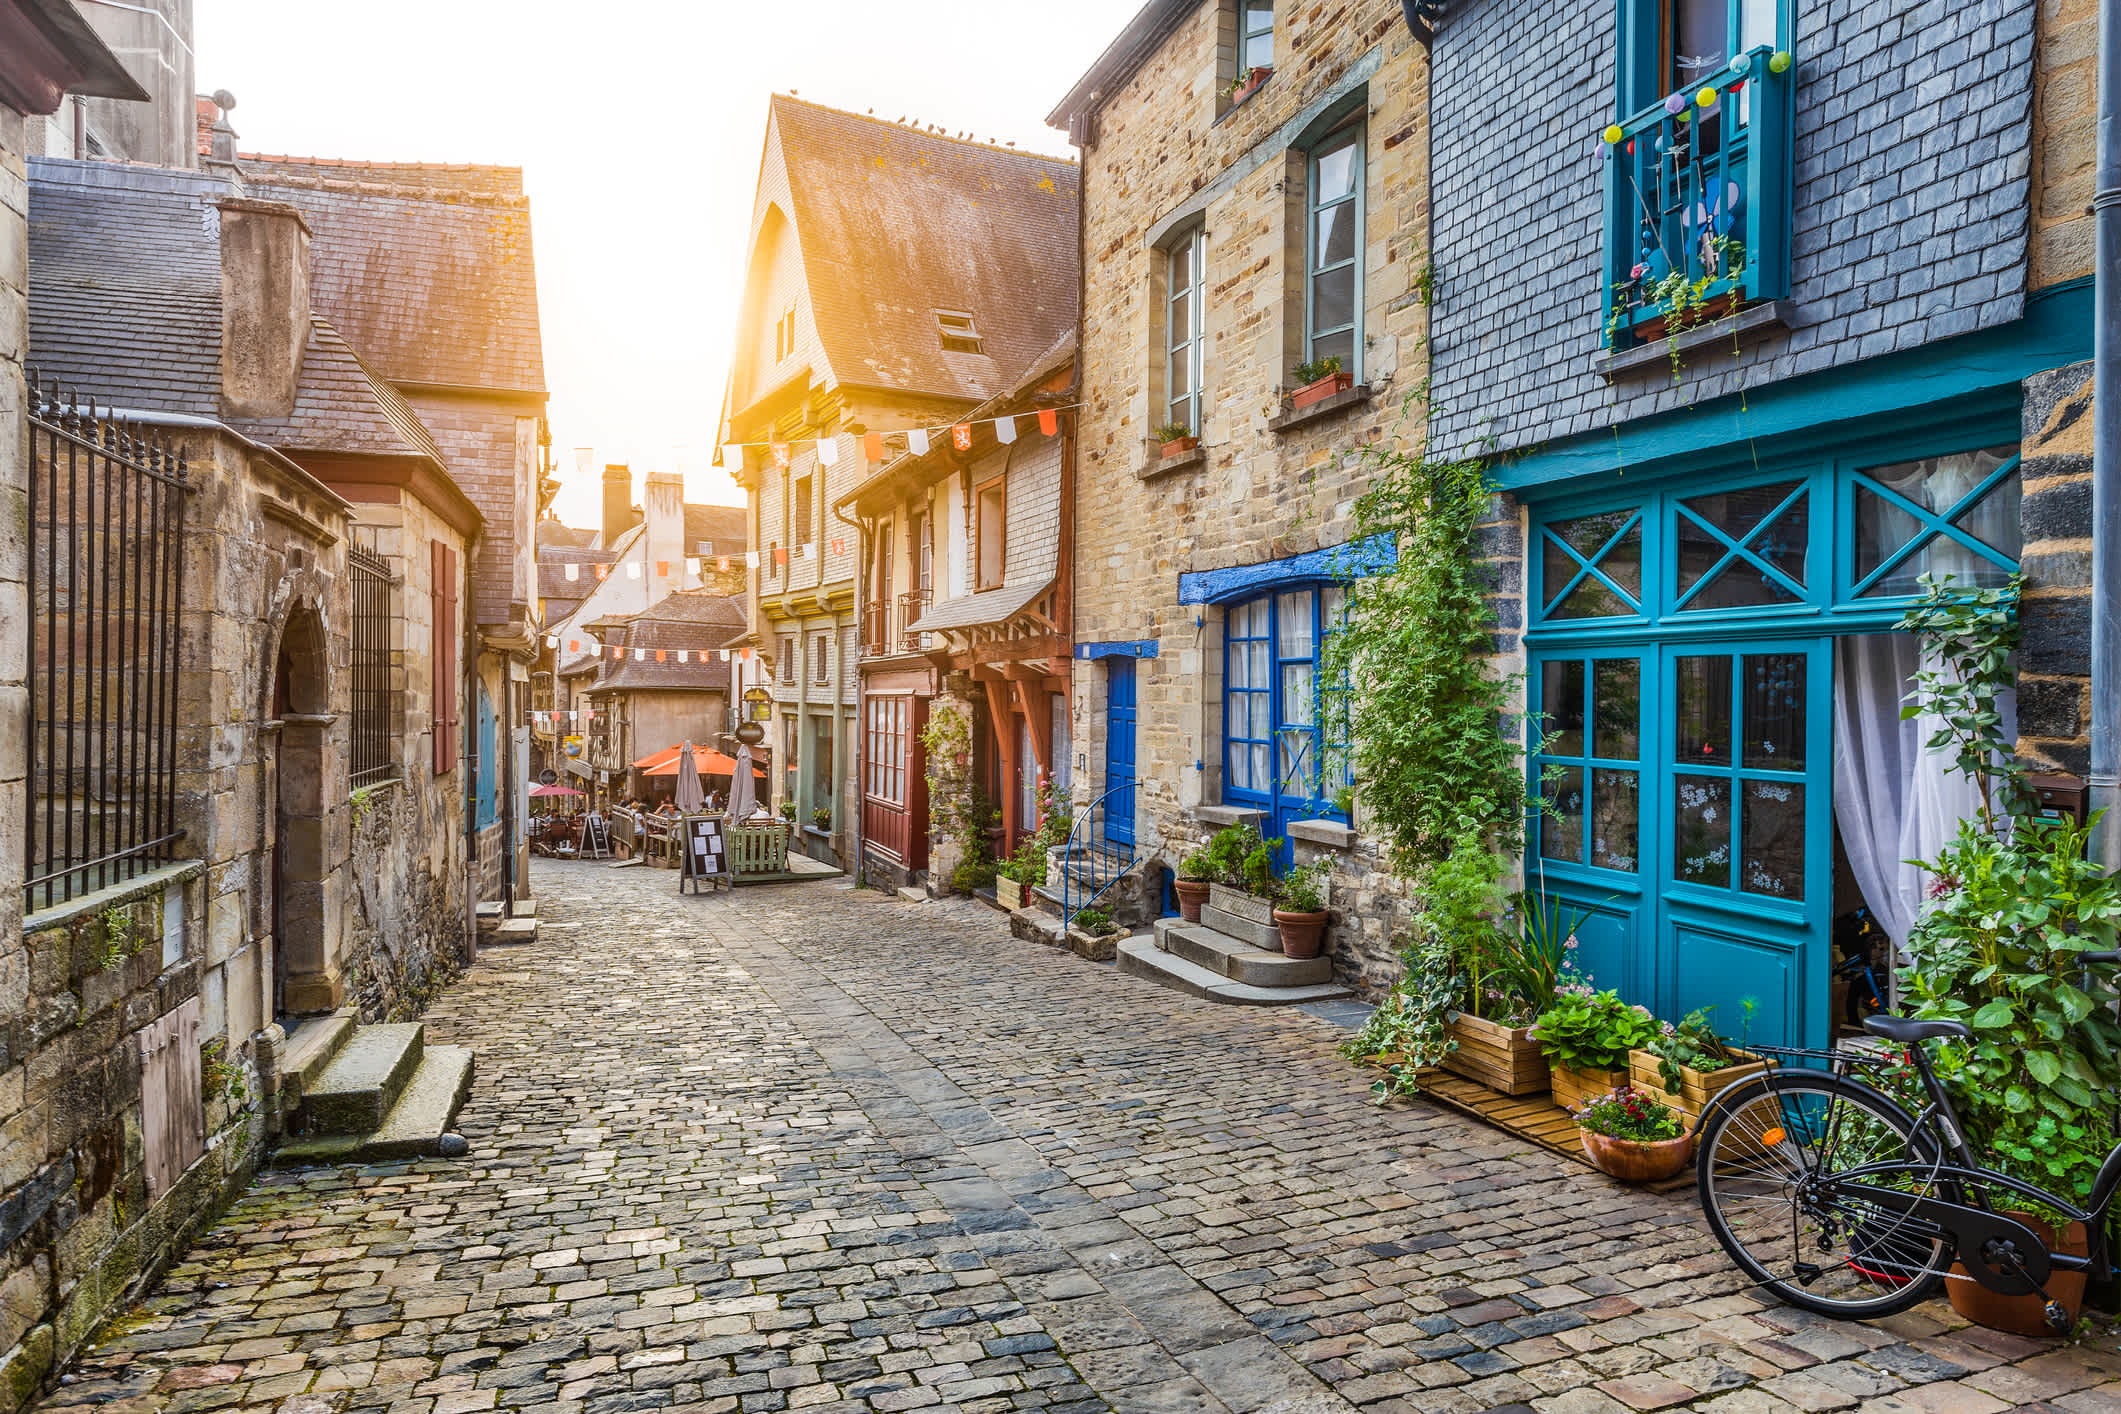 Immerse yourself in the culture in Brittany on a Brittany holiday.